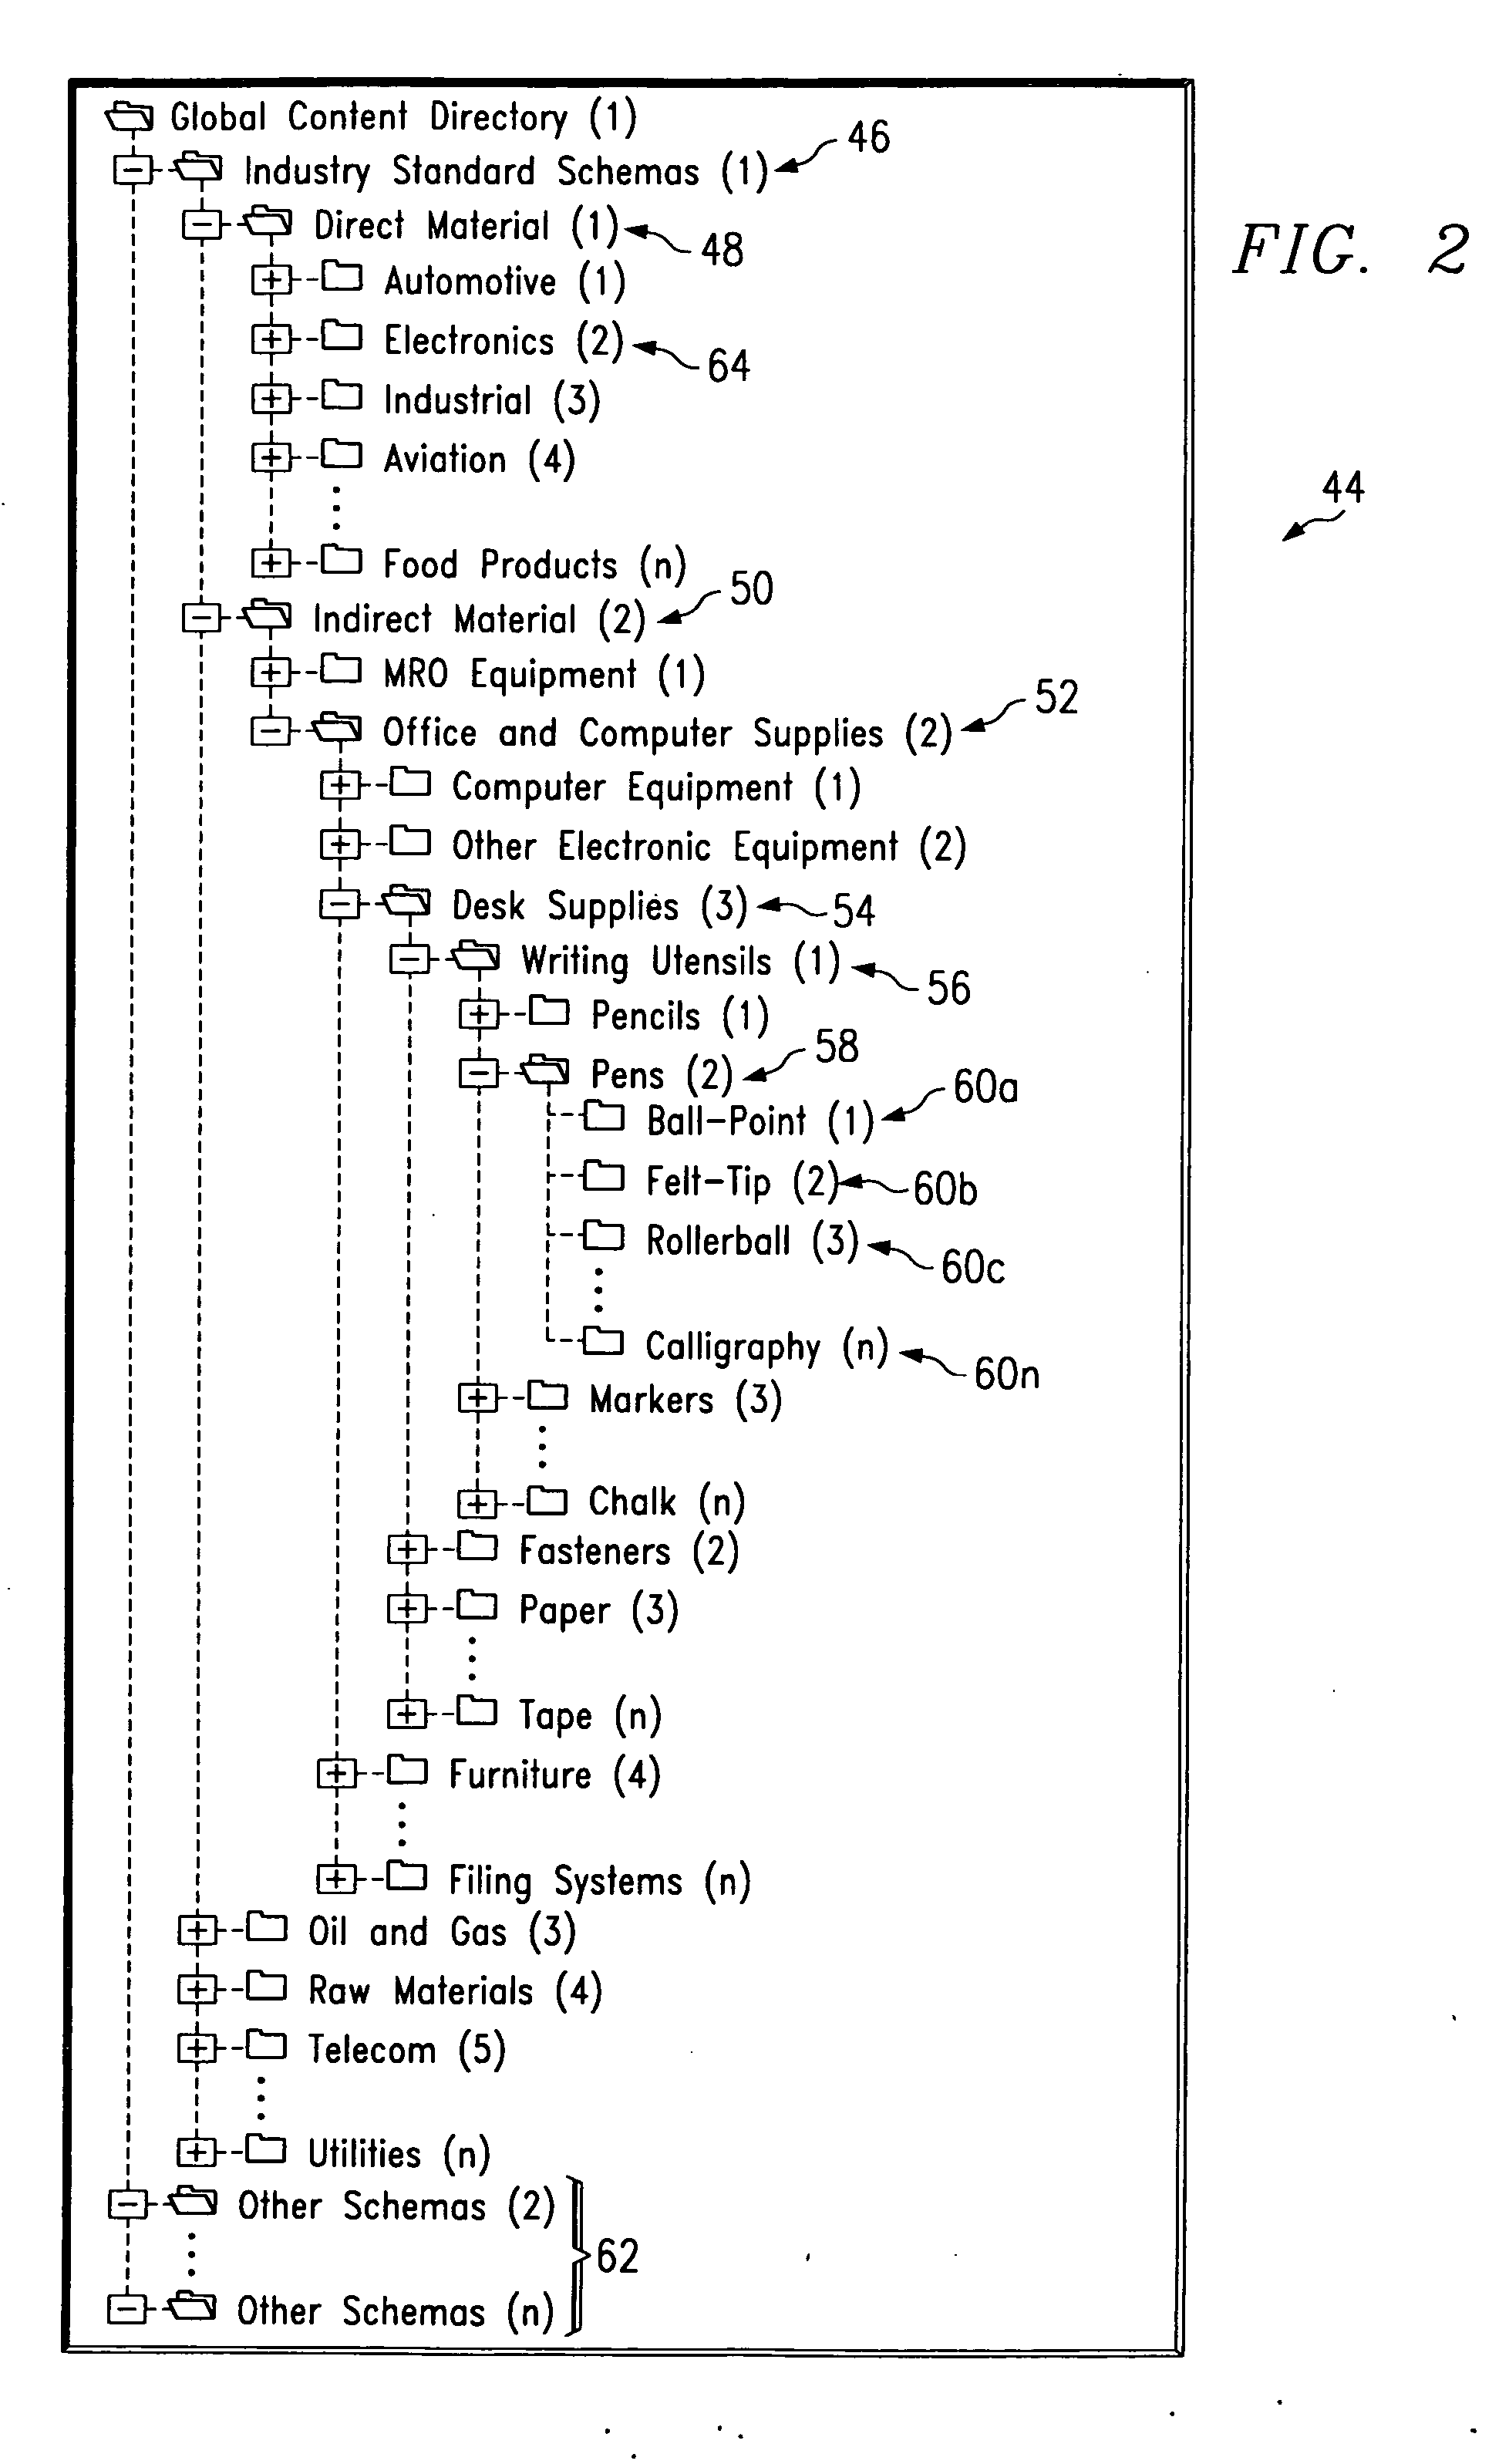 System and method for identifying a product